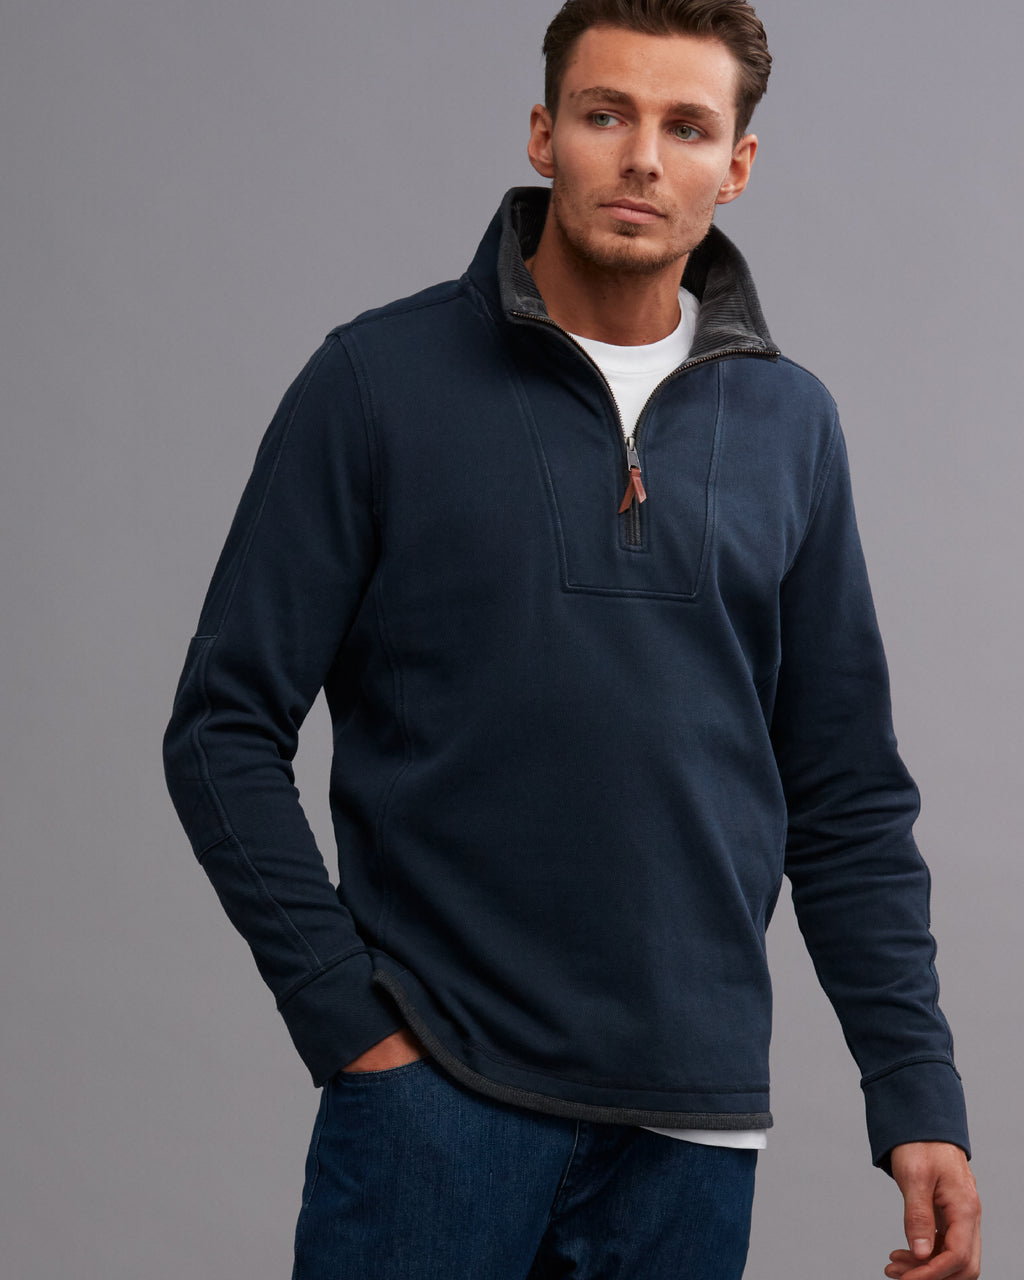 Branded, Stylish and Premium Quality Wholesale Quarter Zip Pullover 